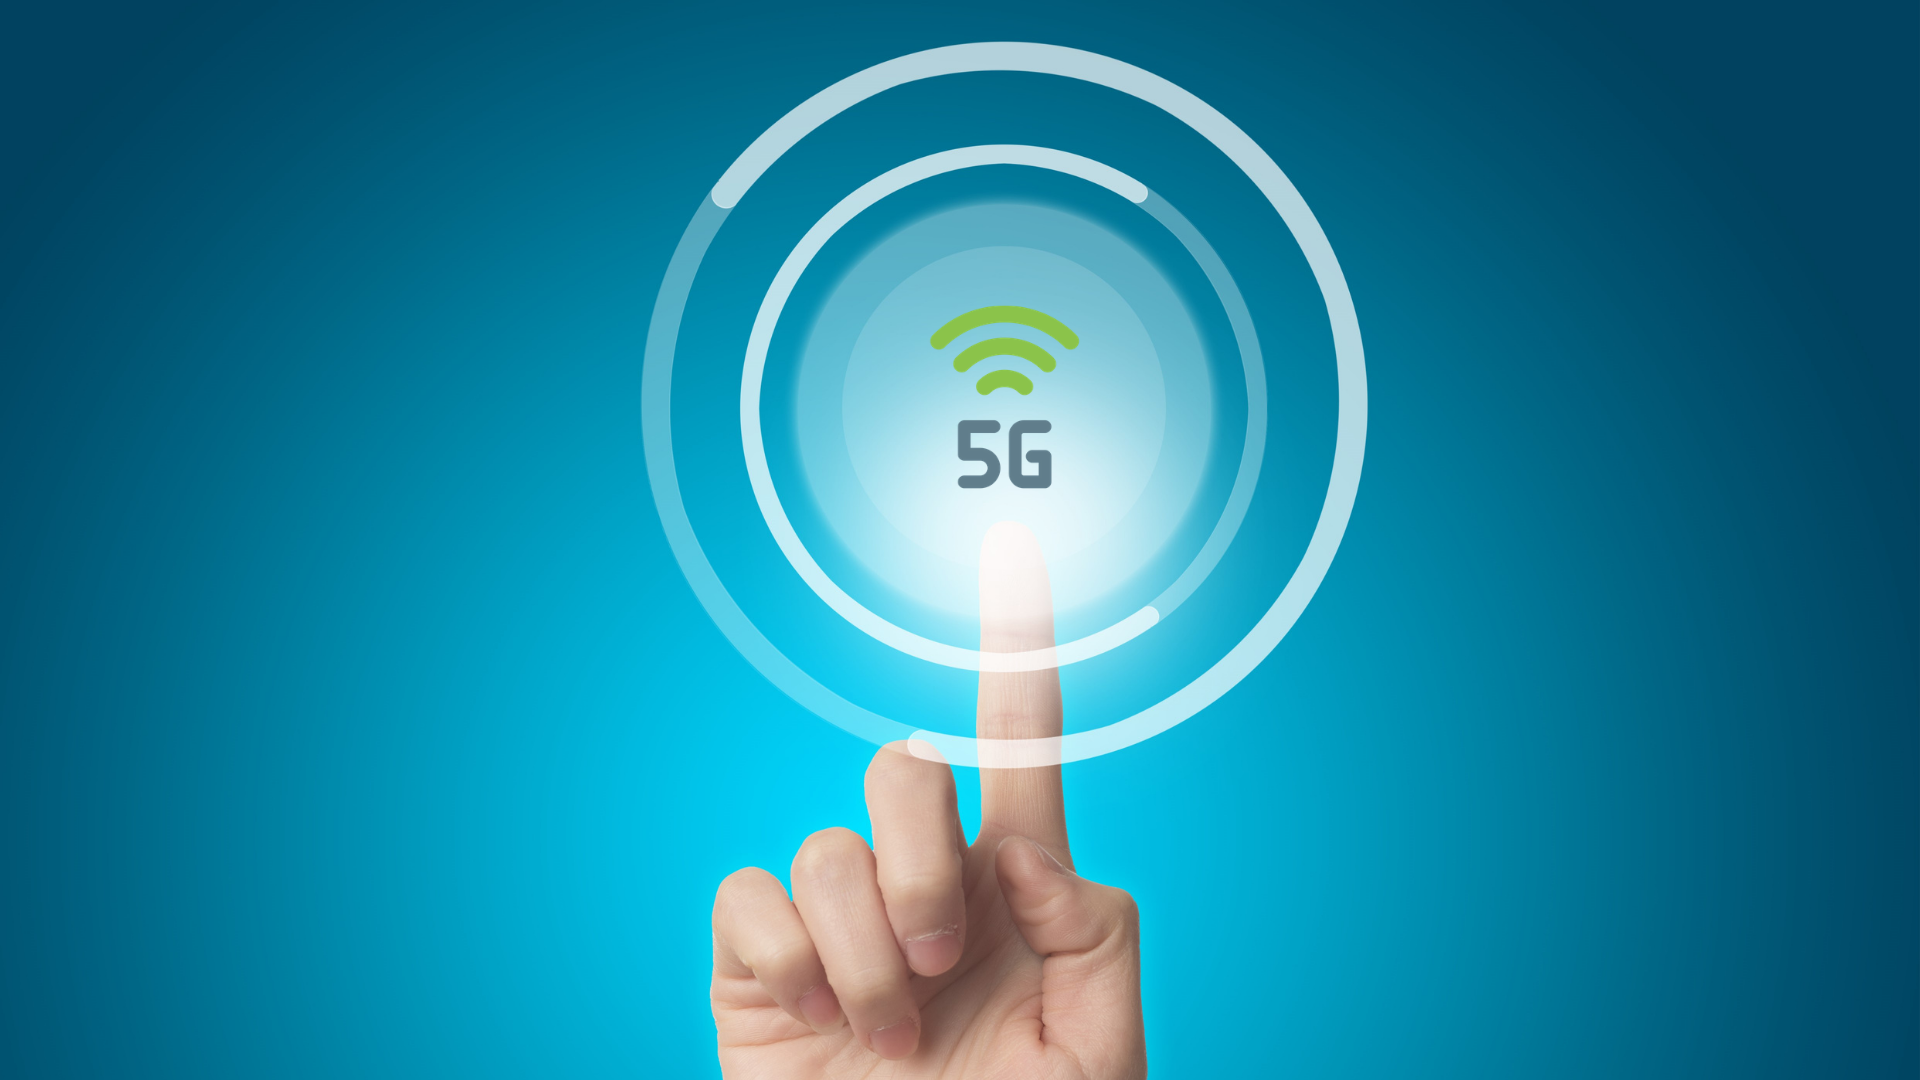 Telefónica says 5G's 'on' refers to what moment? "maturity" of technology.